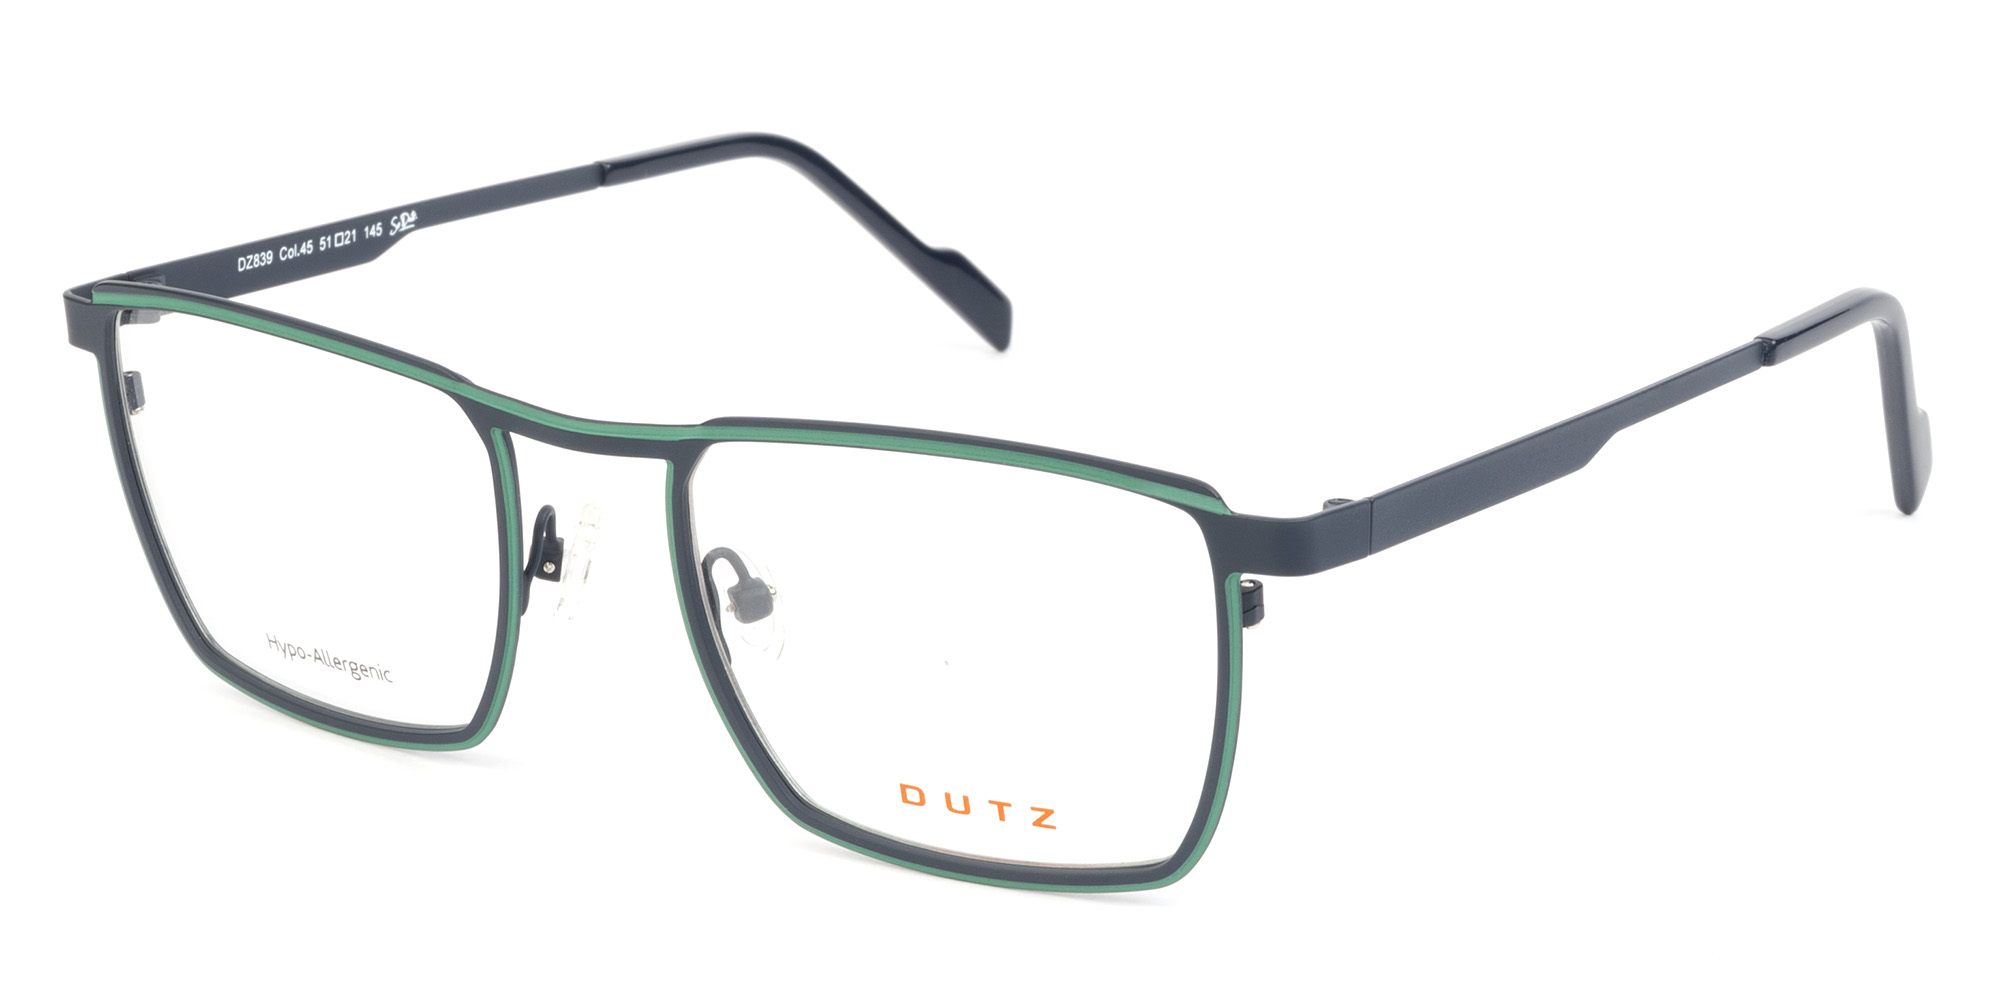 Men's, rectangular, bicolor, dark blue combined with green, metallic frame and temples, with assorted color acetate temple tips